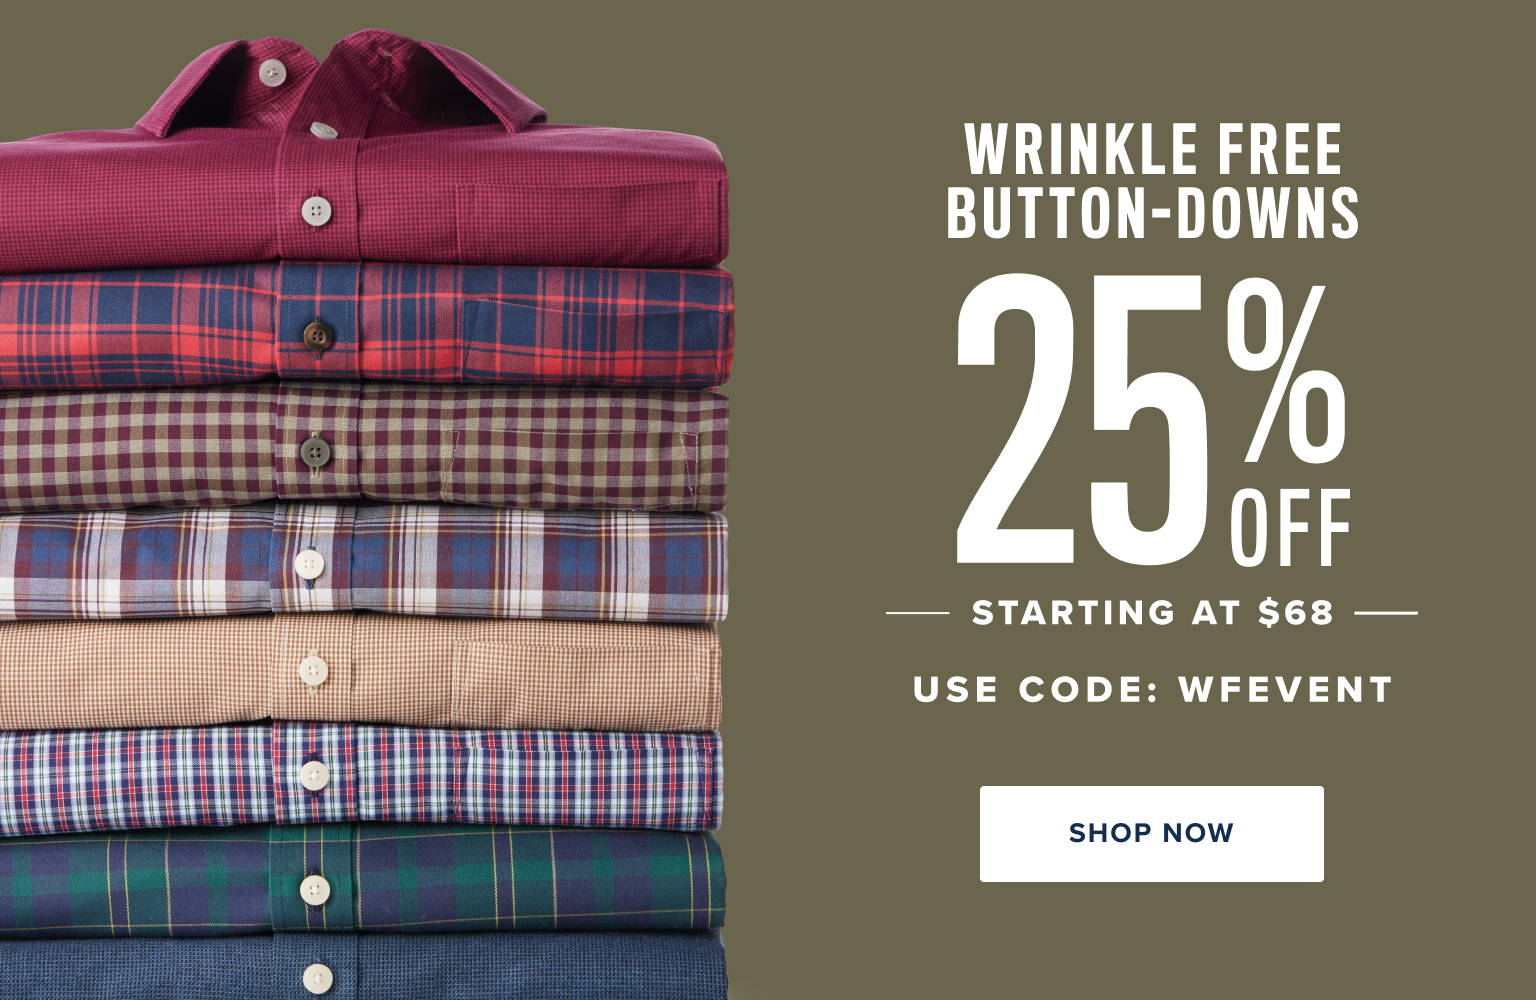 Wrinkle free button downs 25% off. Starting at $68. Use code: WFEVENT